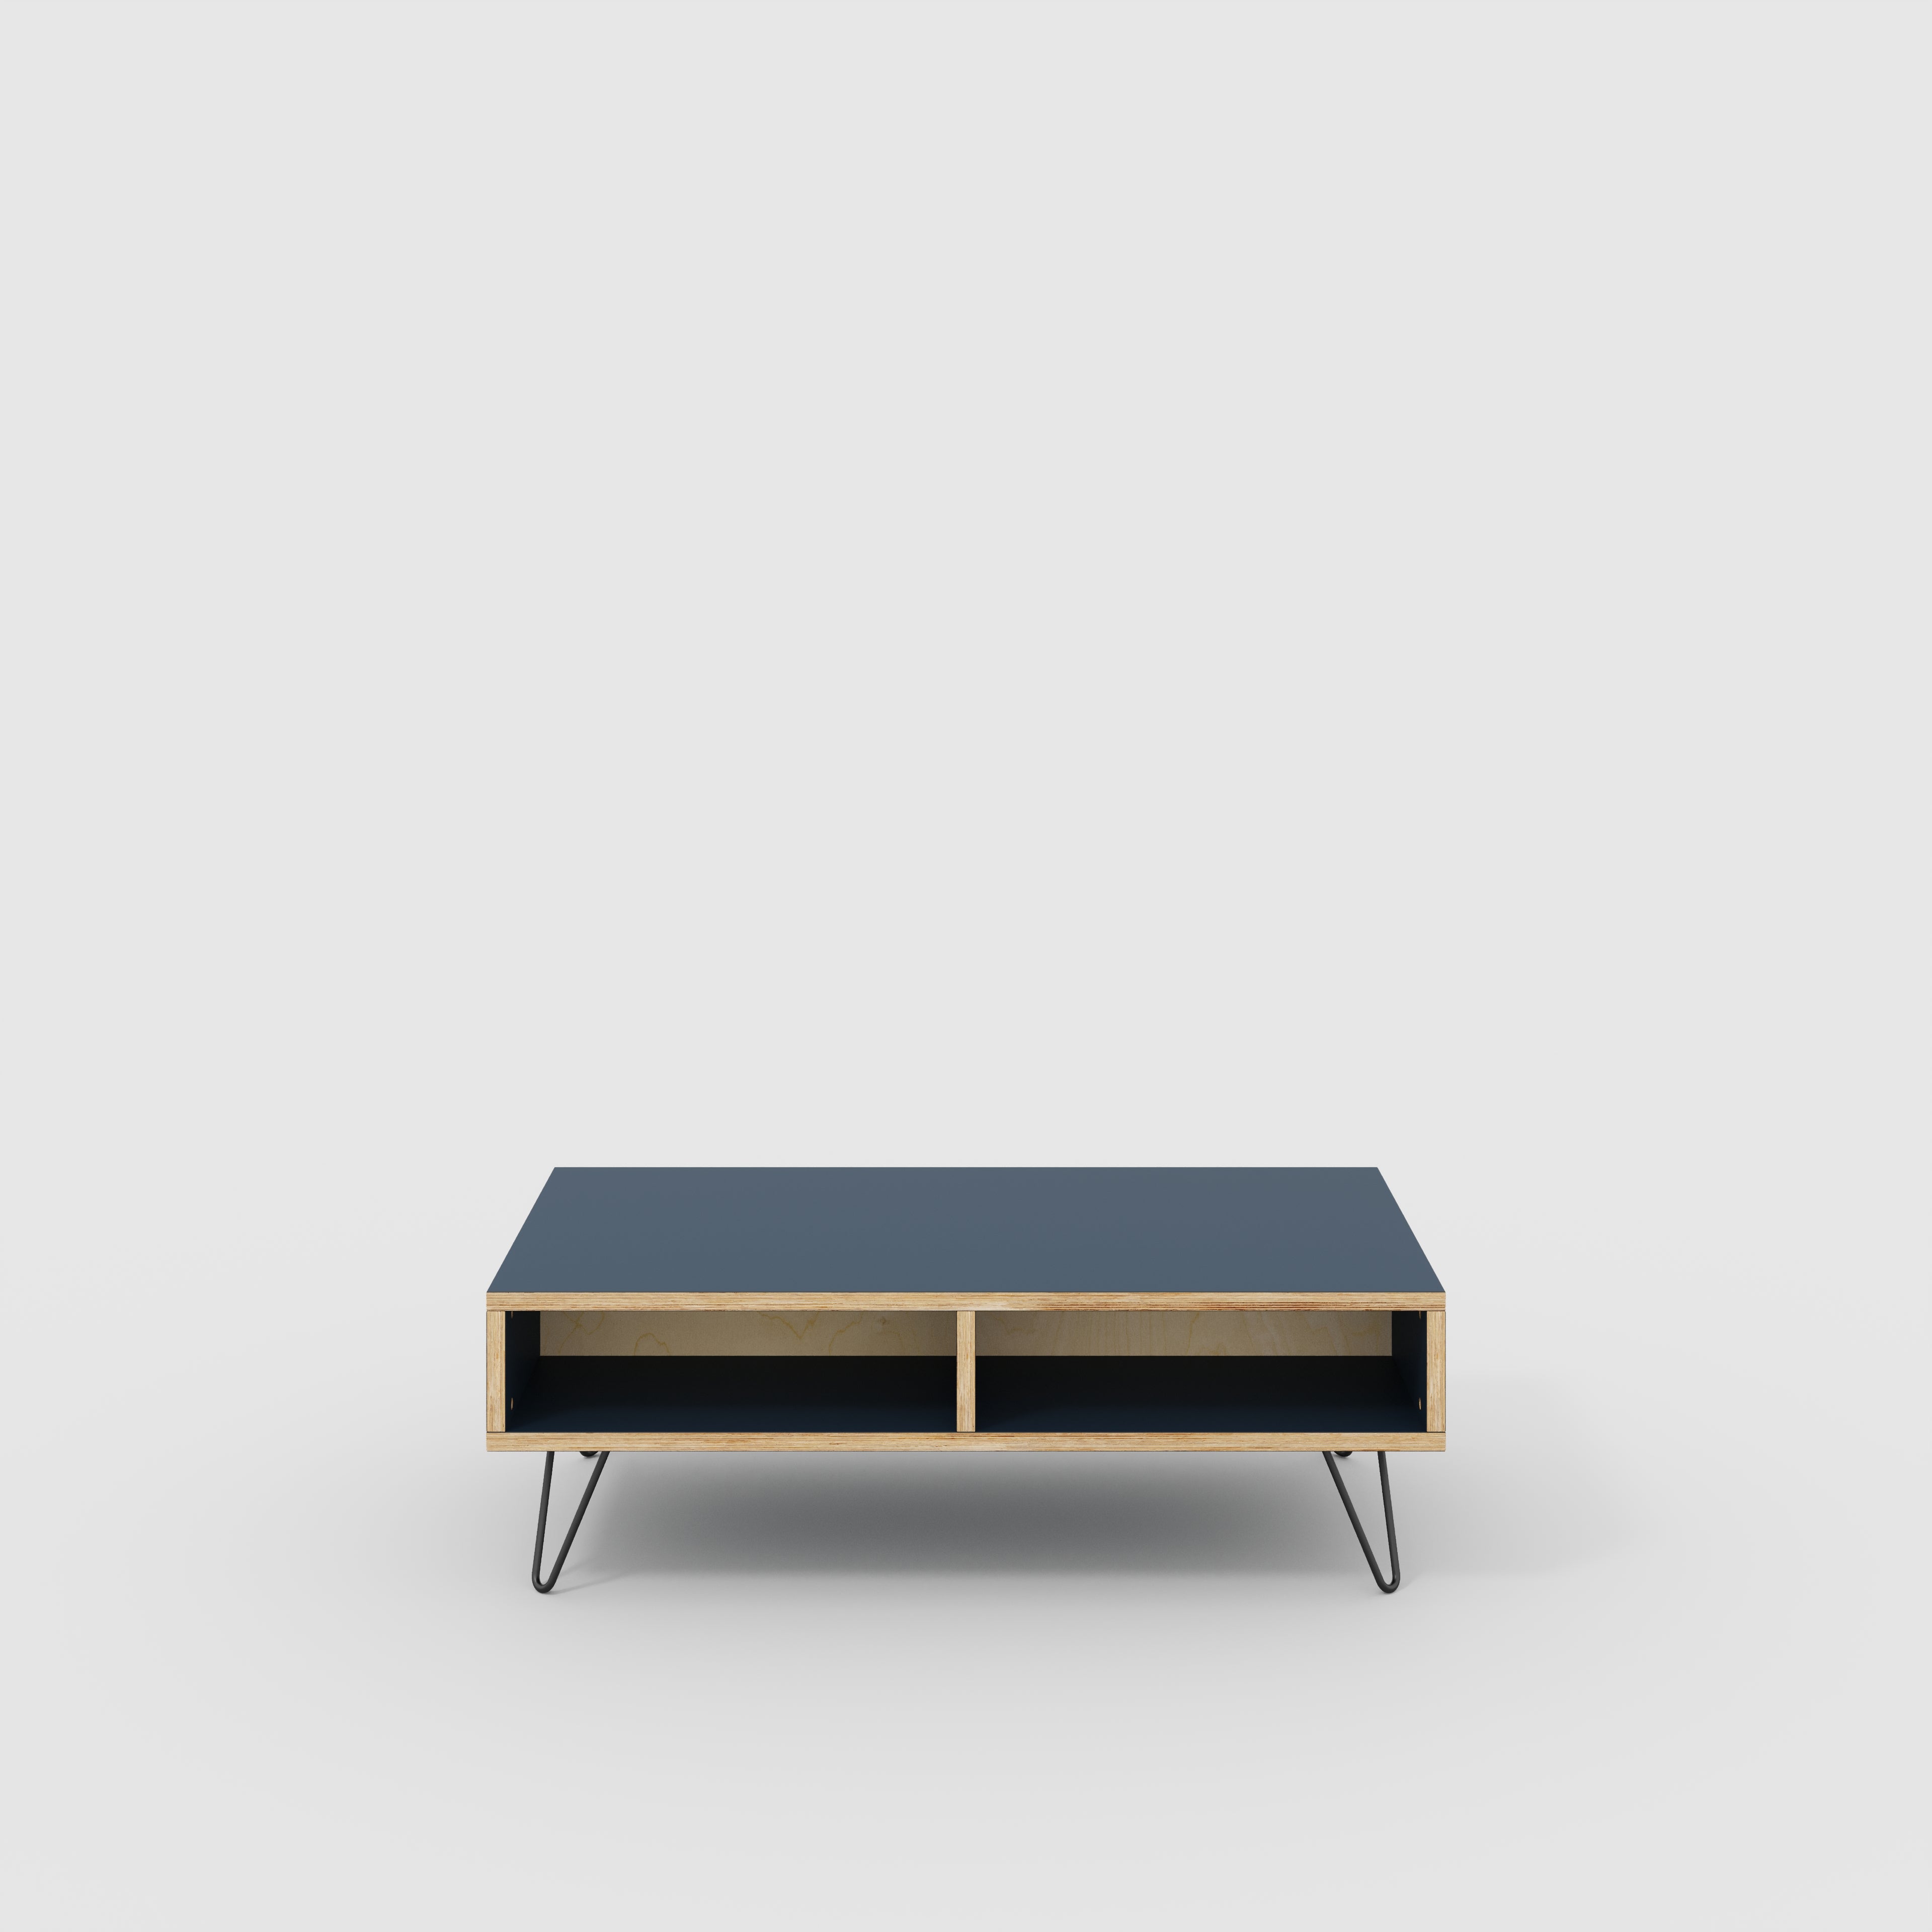 Coffee Table with Box Storage and Black Hairpin Legs - Formica Night Sea Blue - 1200(w) x 600(d) x 400(h)